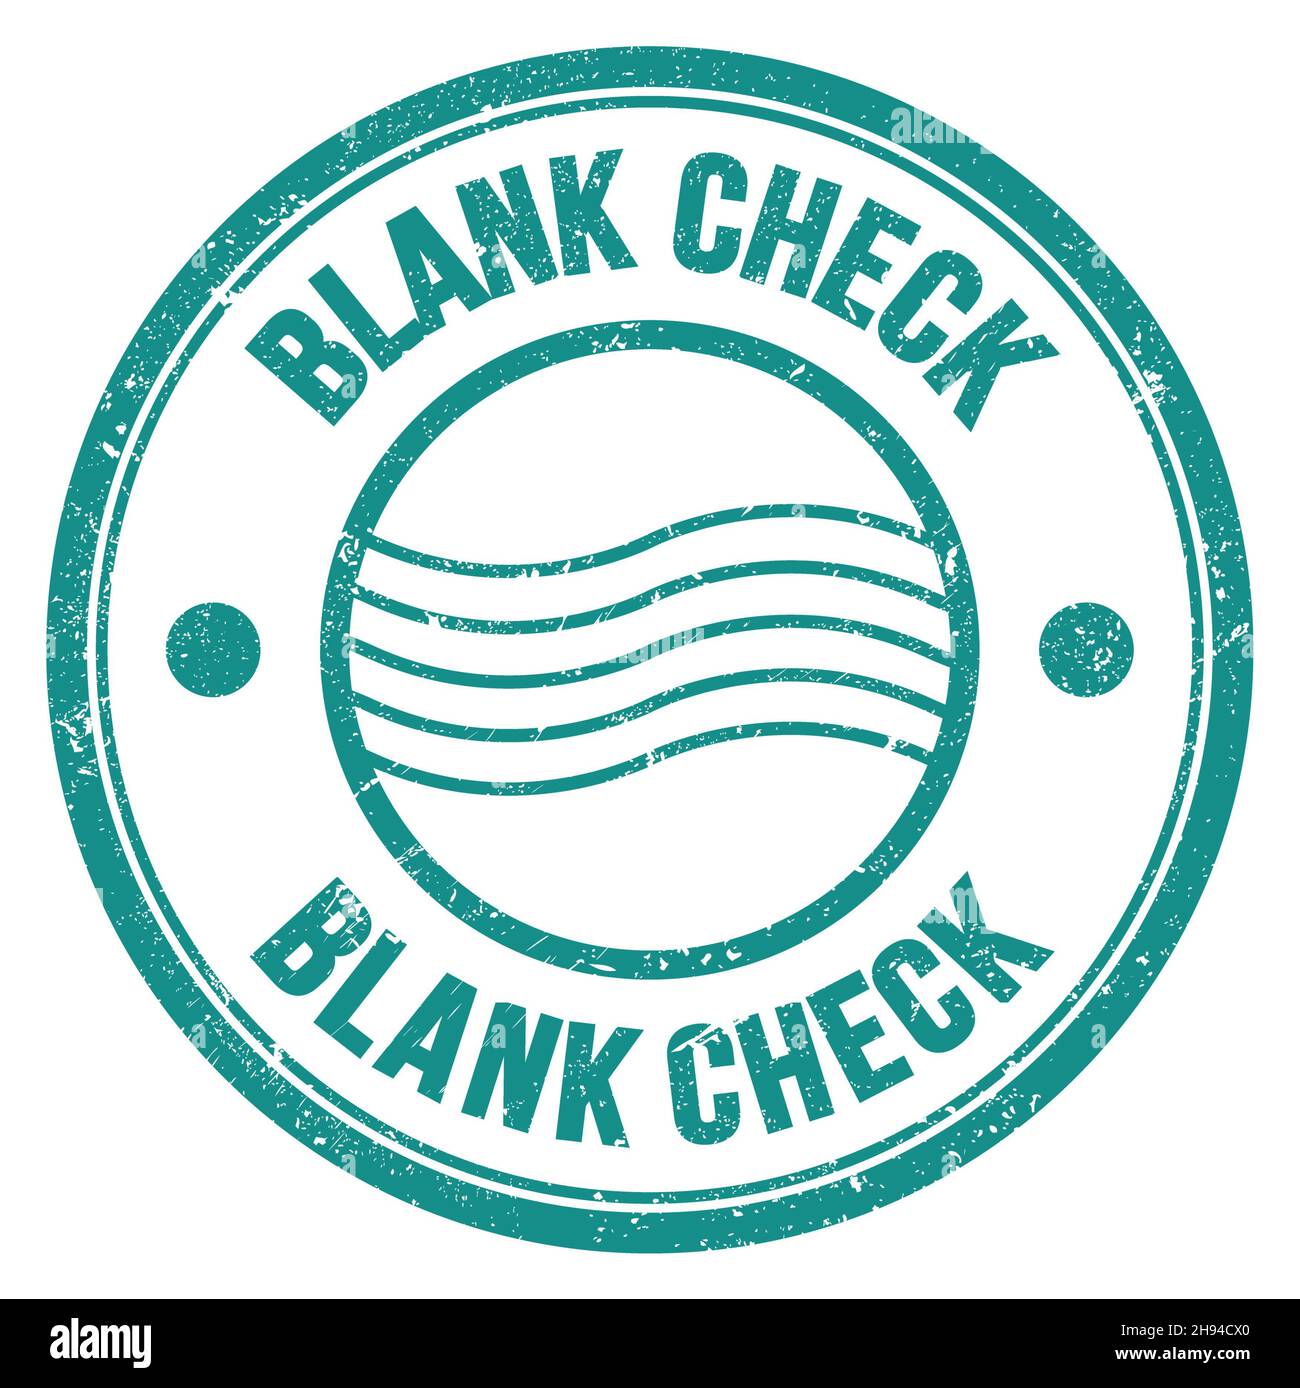 BLANK CHECK word written on blue round postal stamp sign Stock Photo